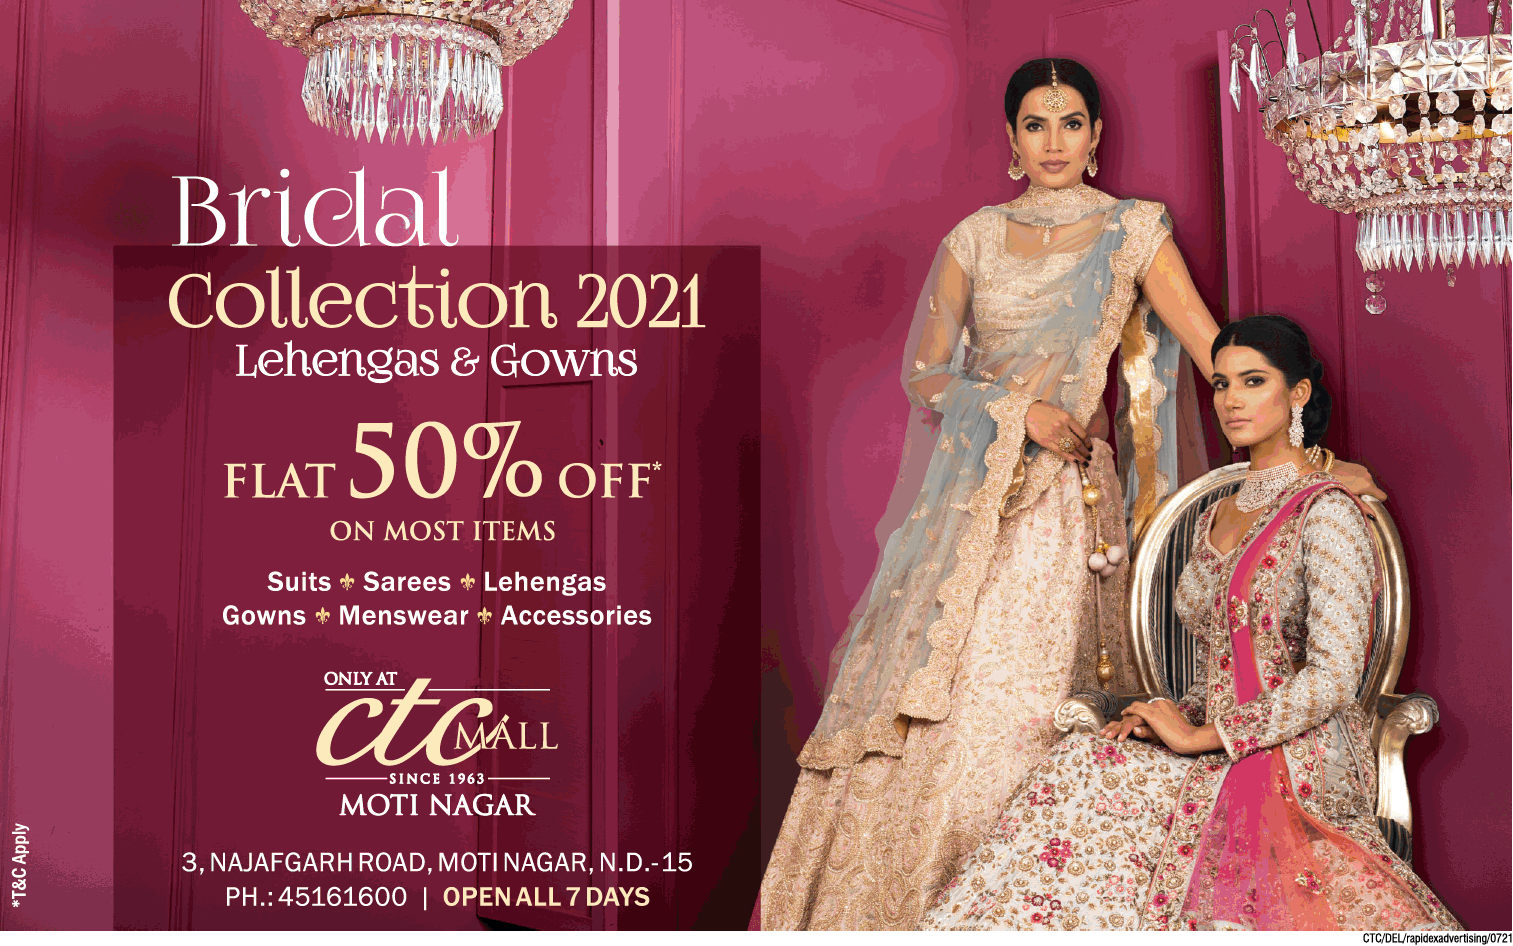 ctc-mall-bridal-collection-2021-lehengas-&-gowns-flat-50%-off-ad-times-of-india-delhi-10-7-2021